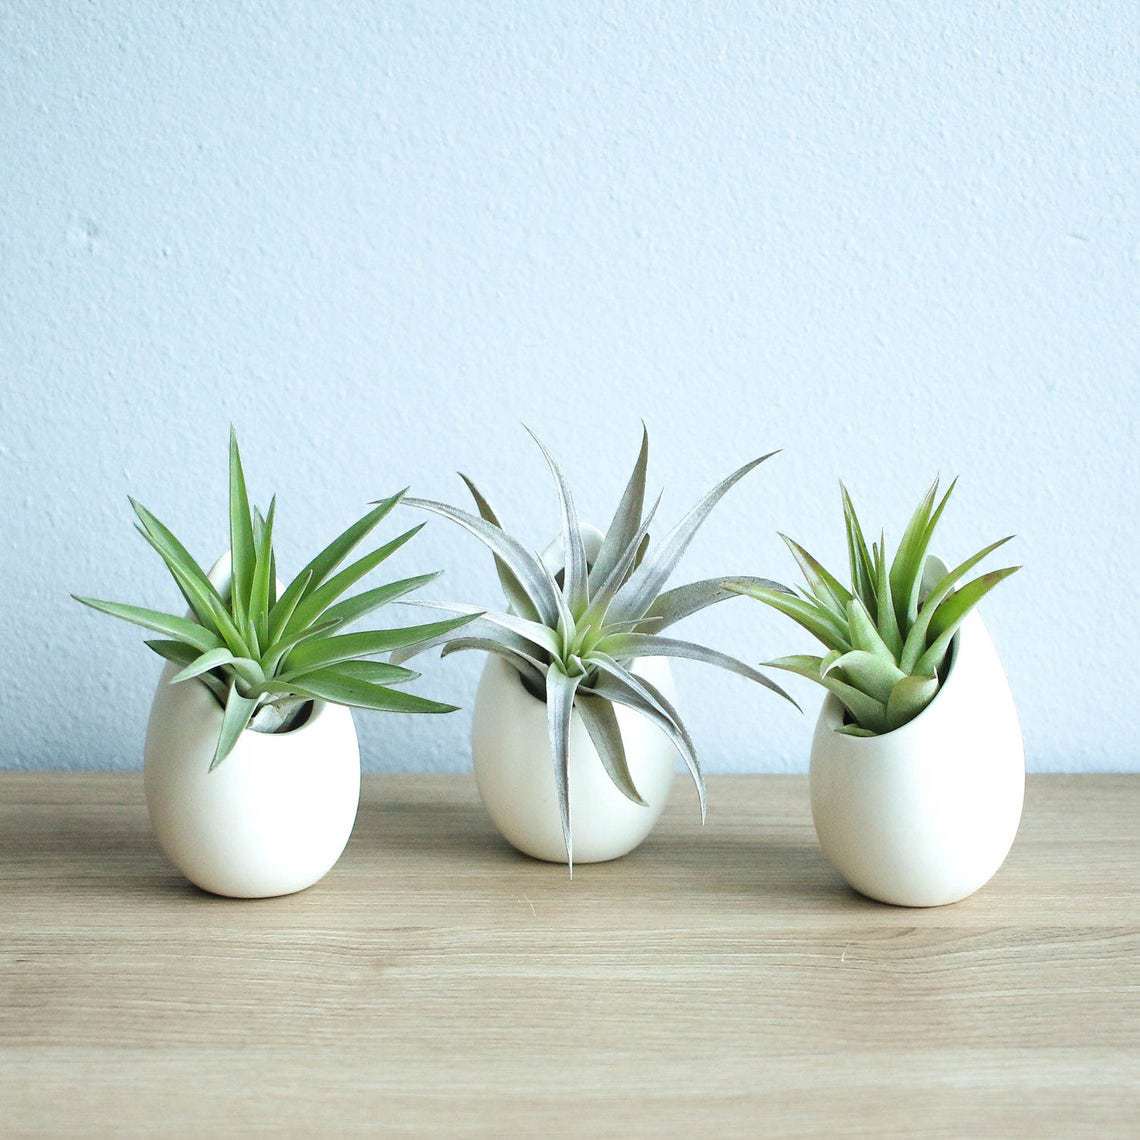 inexpensive valentines gifts for coworkers - Air Plant Container